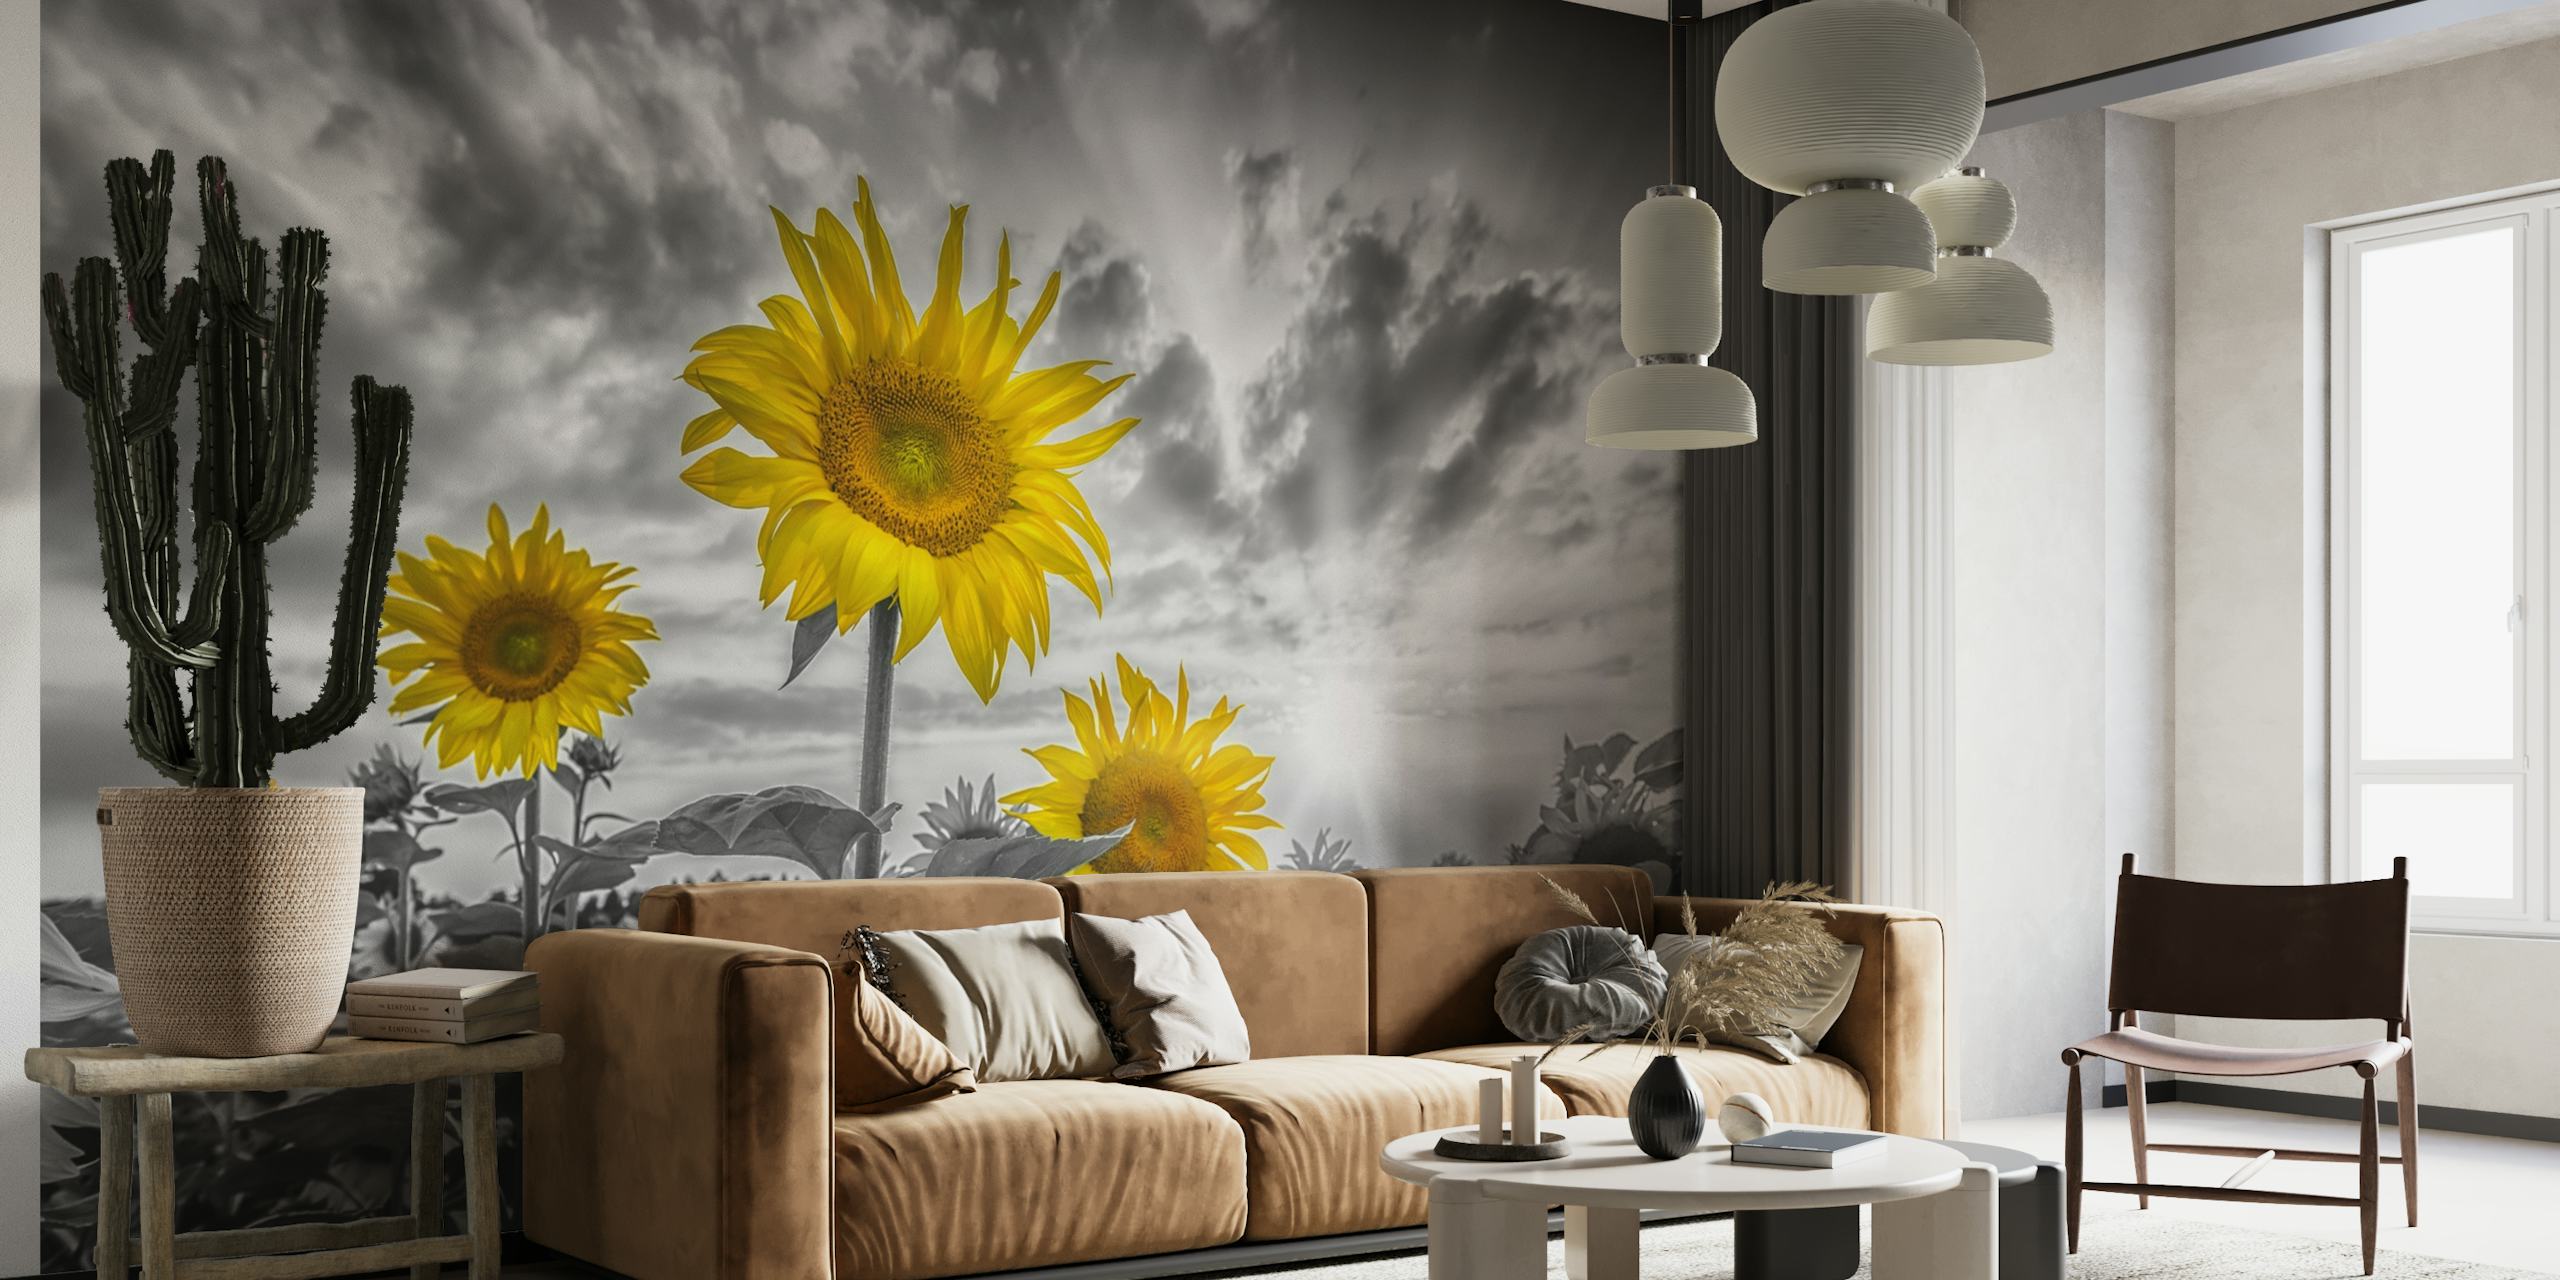 Color pop sunflowers in sunset papel pintado